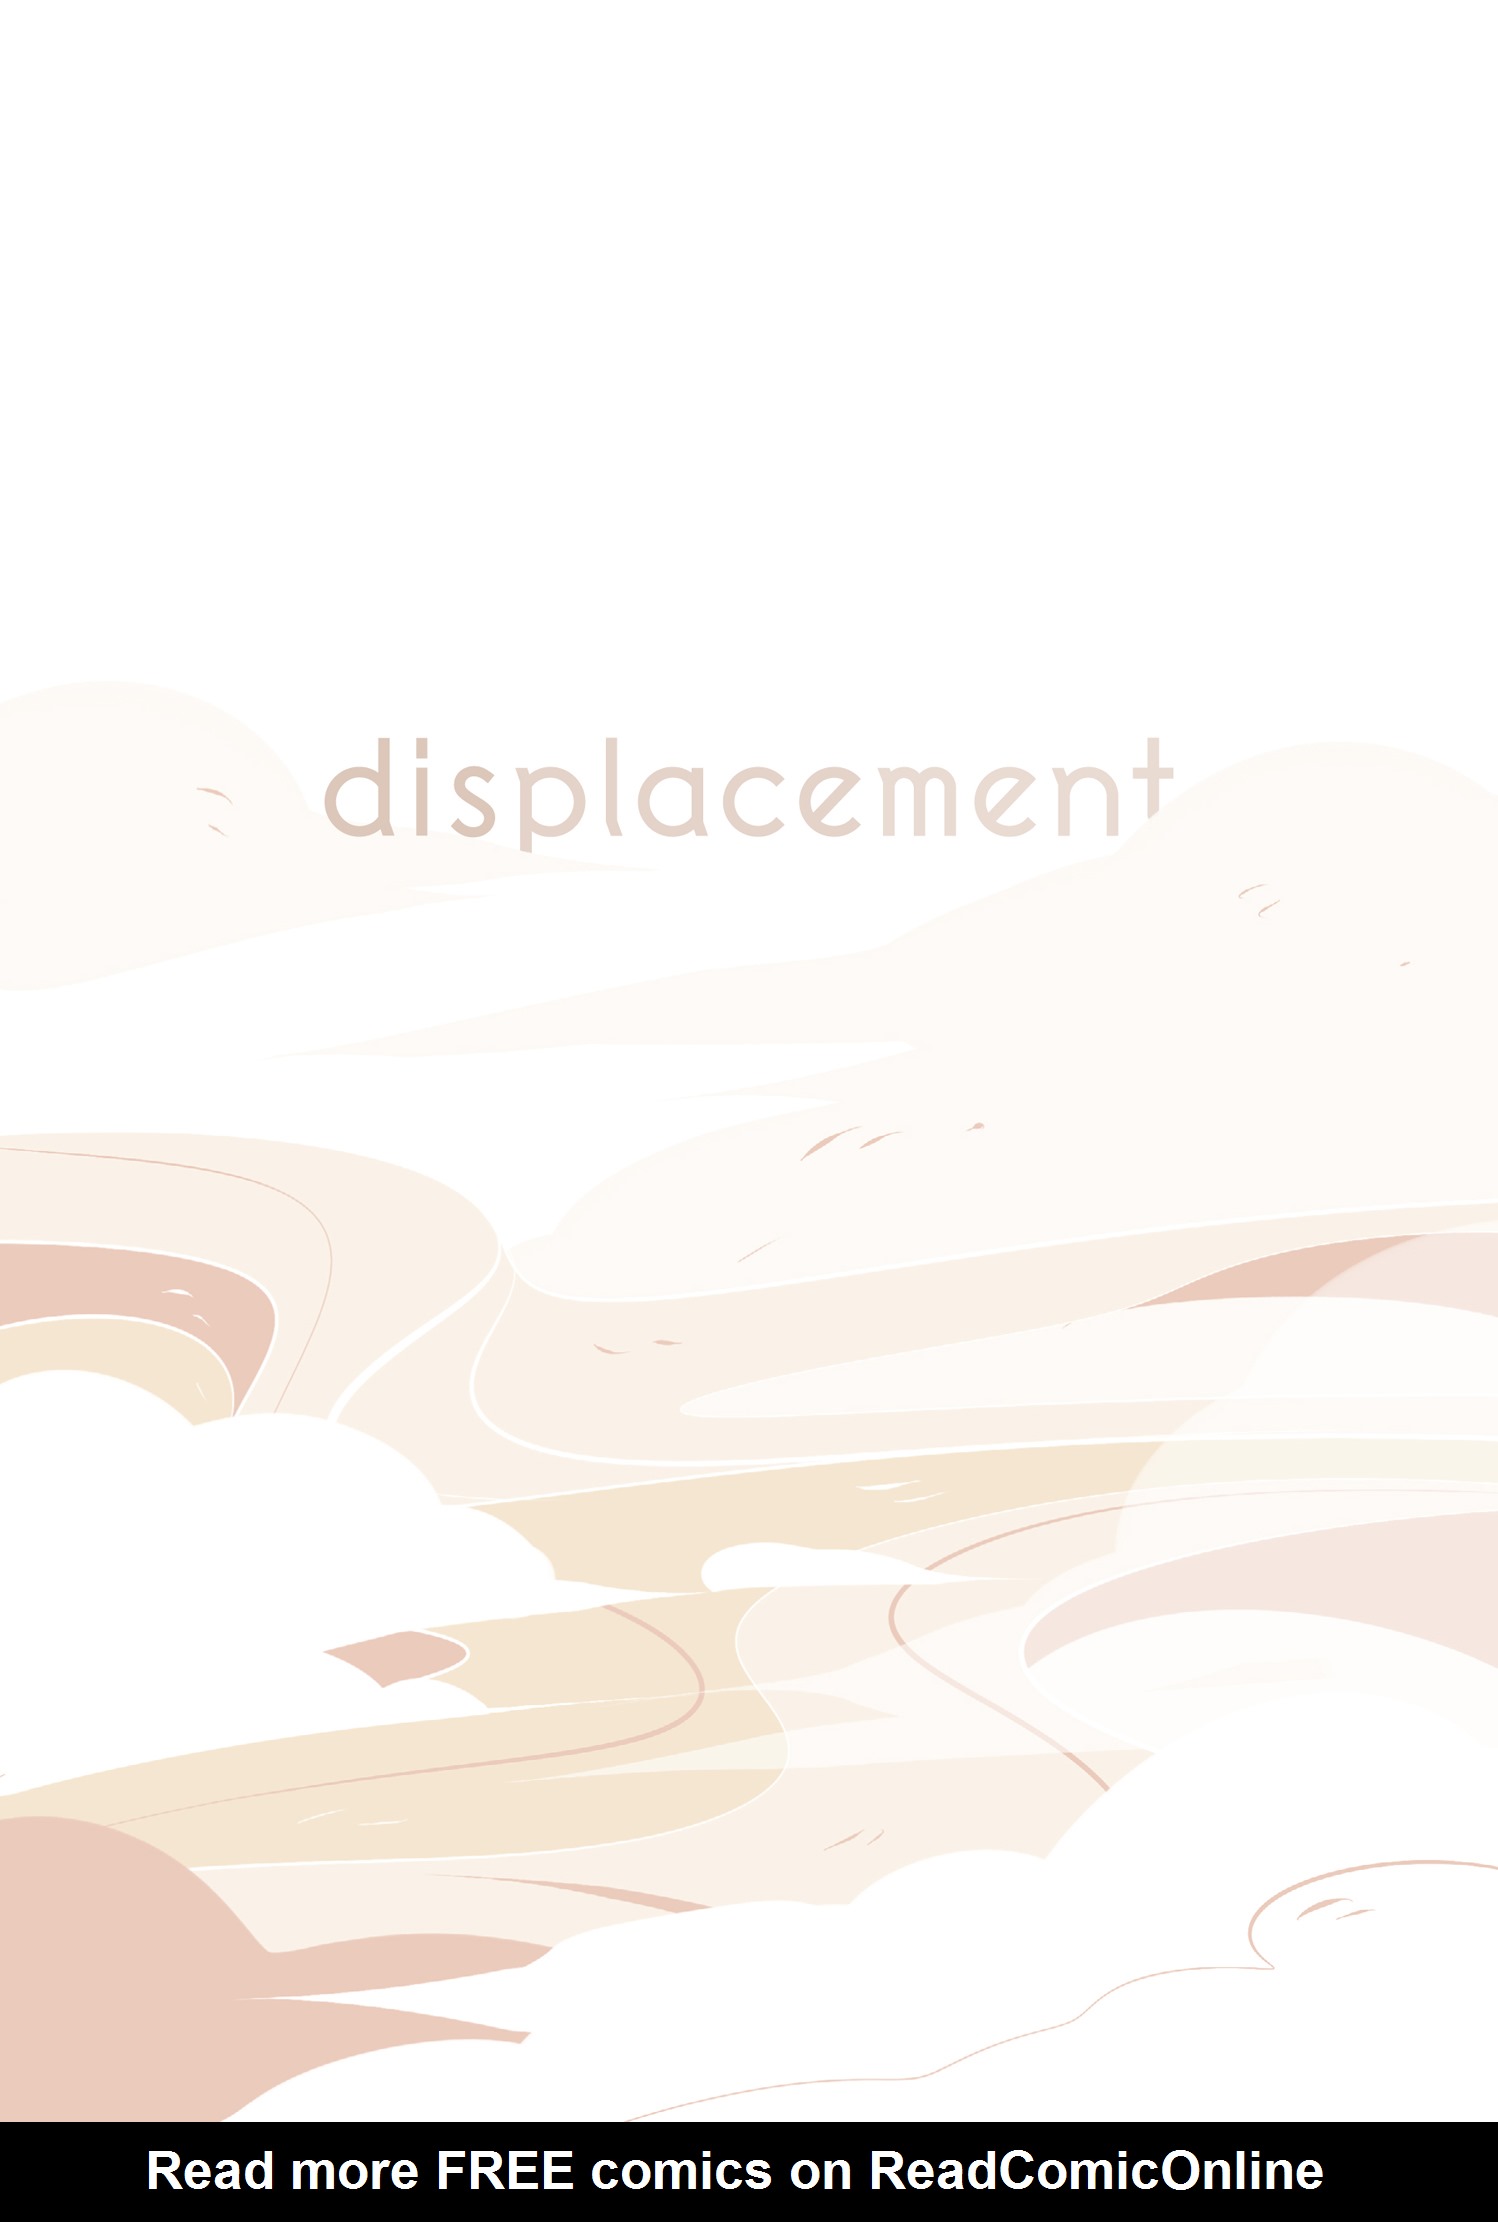 Read online Displacement comic -  Issue # TPB (Part 1) - 2